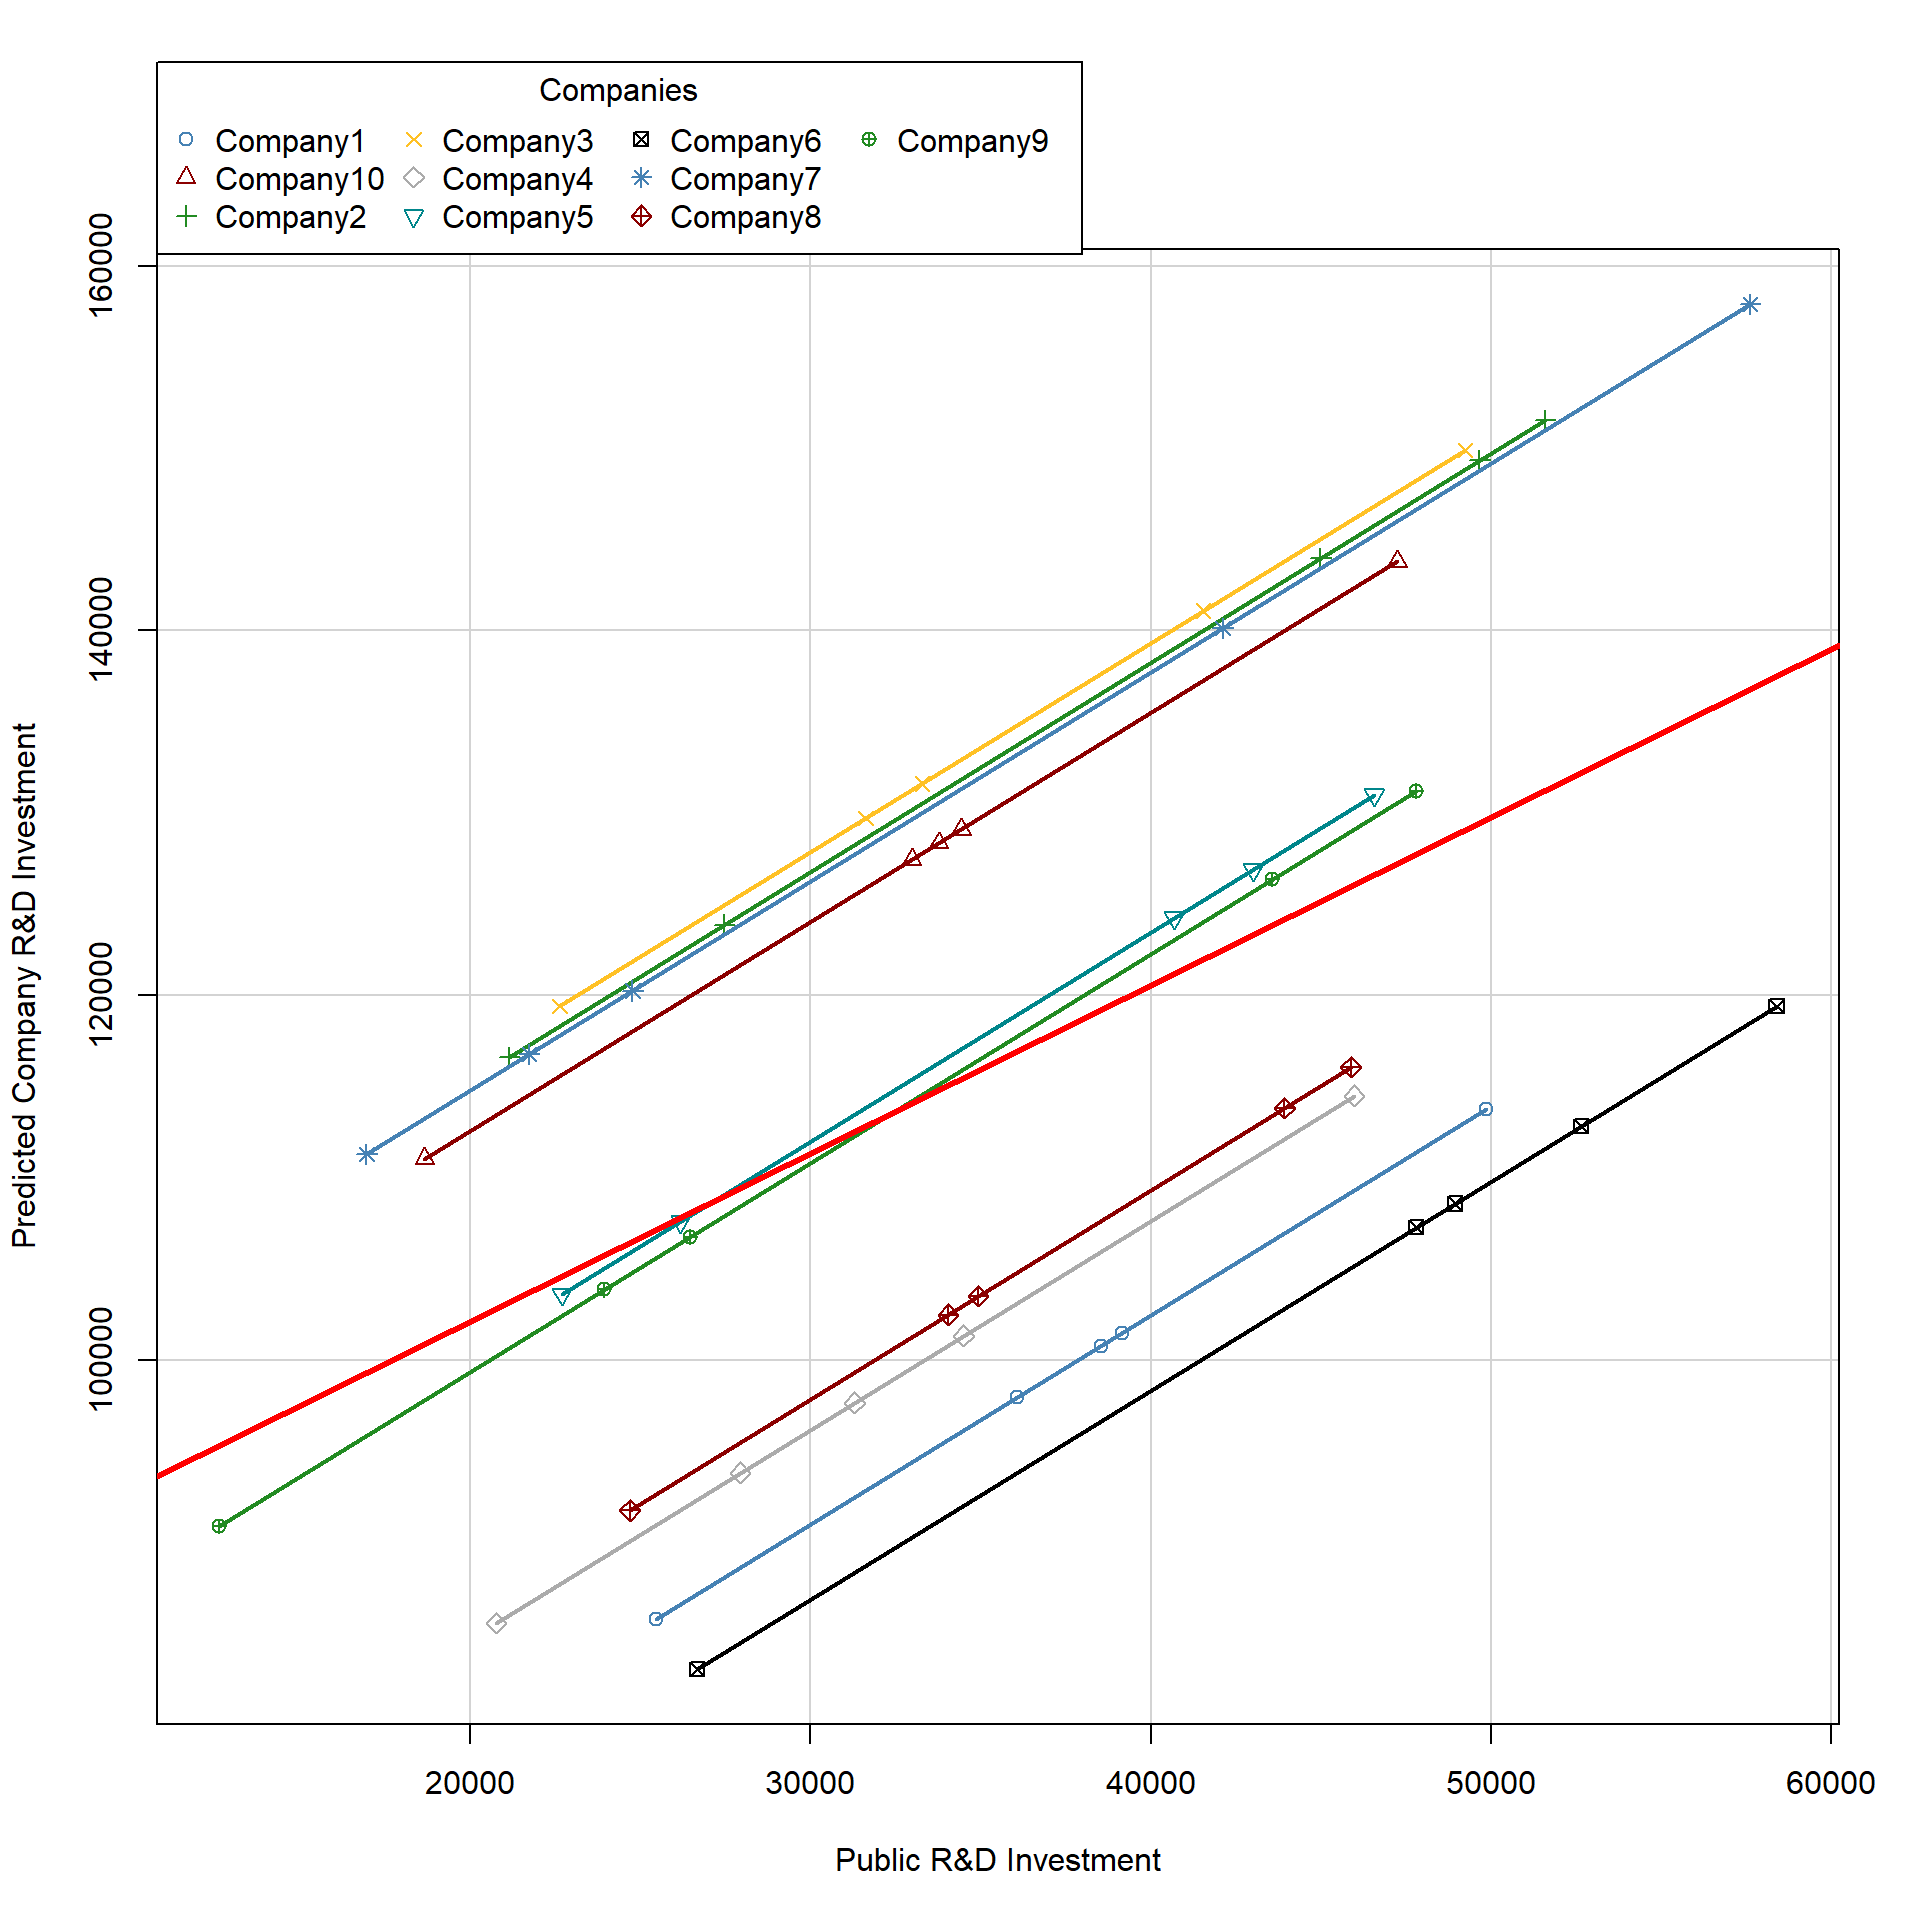 Plot of OLS with dummy variables